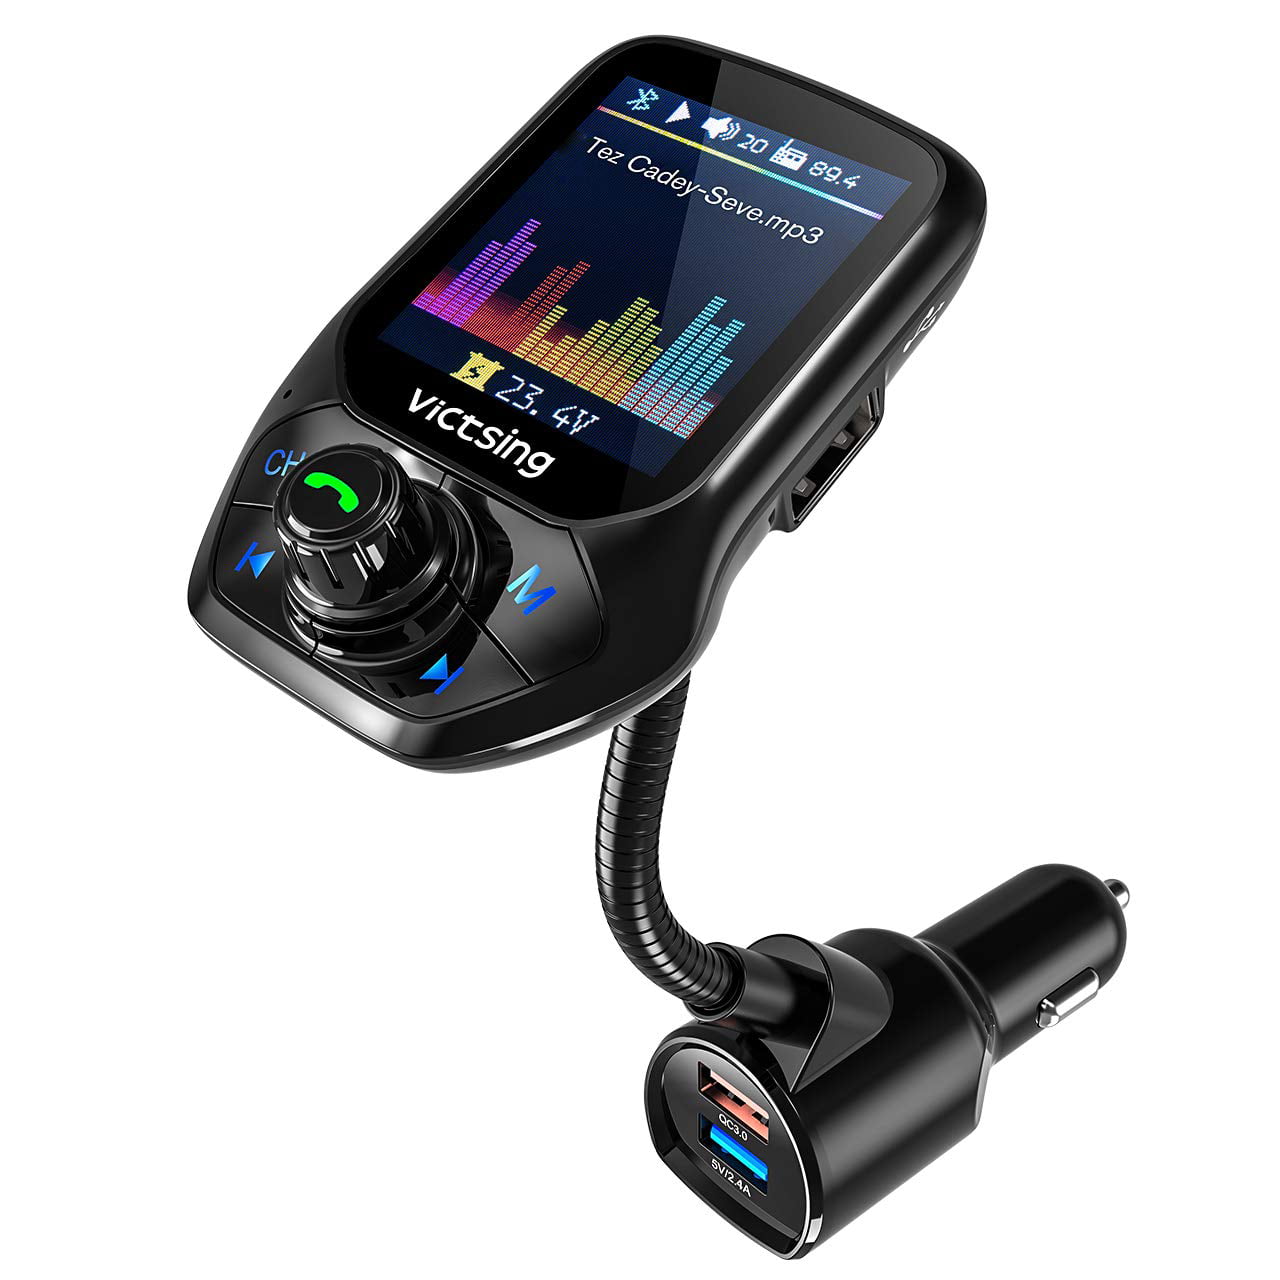 Auto Scan Function Hands-Free Calls 3 USB Ports 1.8 Color Screen Wireless Radio Transmitter Adapter with EQ Mode Upgraded Version AUX Input 4 Music Playing Bluetooth FM Transmitter for Car